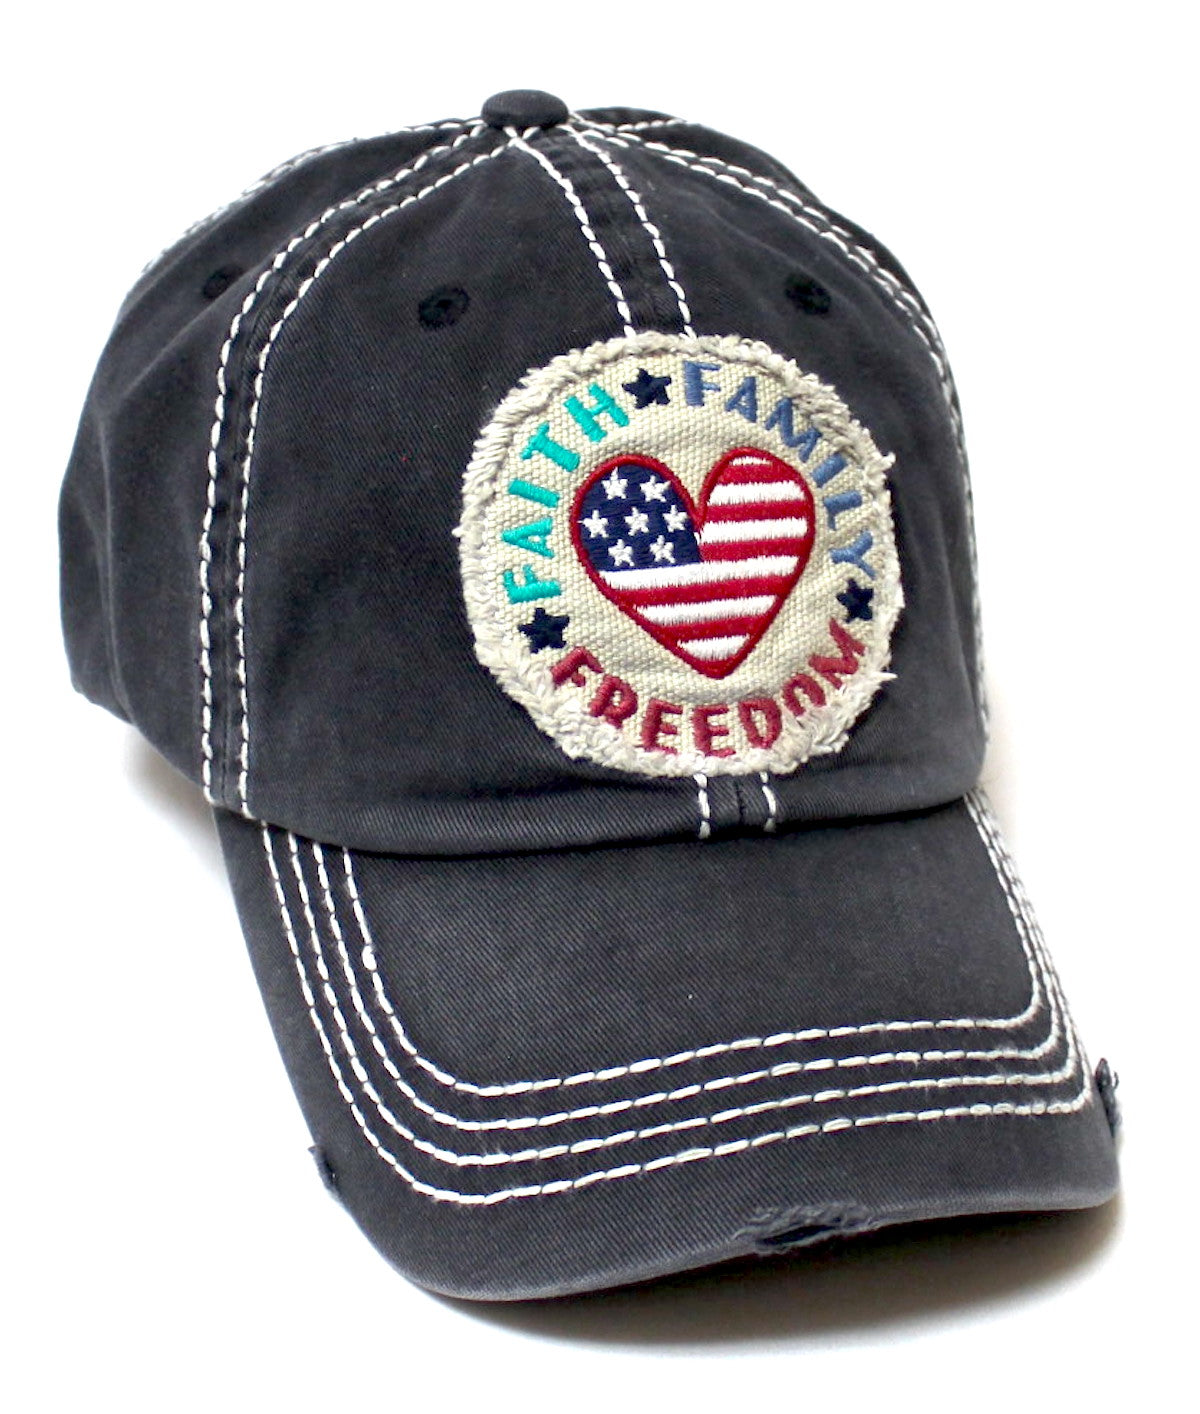 Unisex Adjustable Ballcap Faith, Family, Freedom American Flag Heart Patch Embroidery Hat, Black